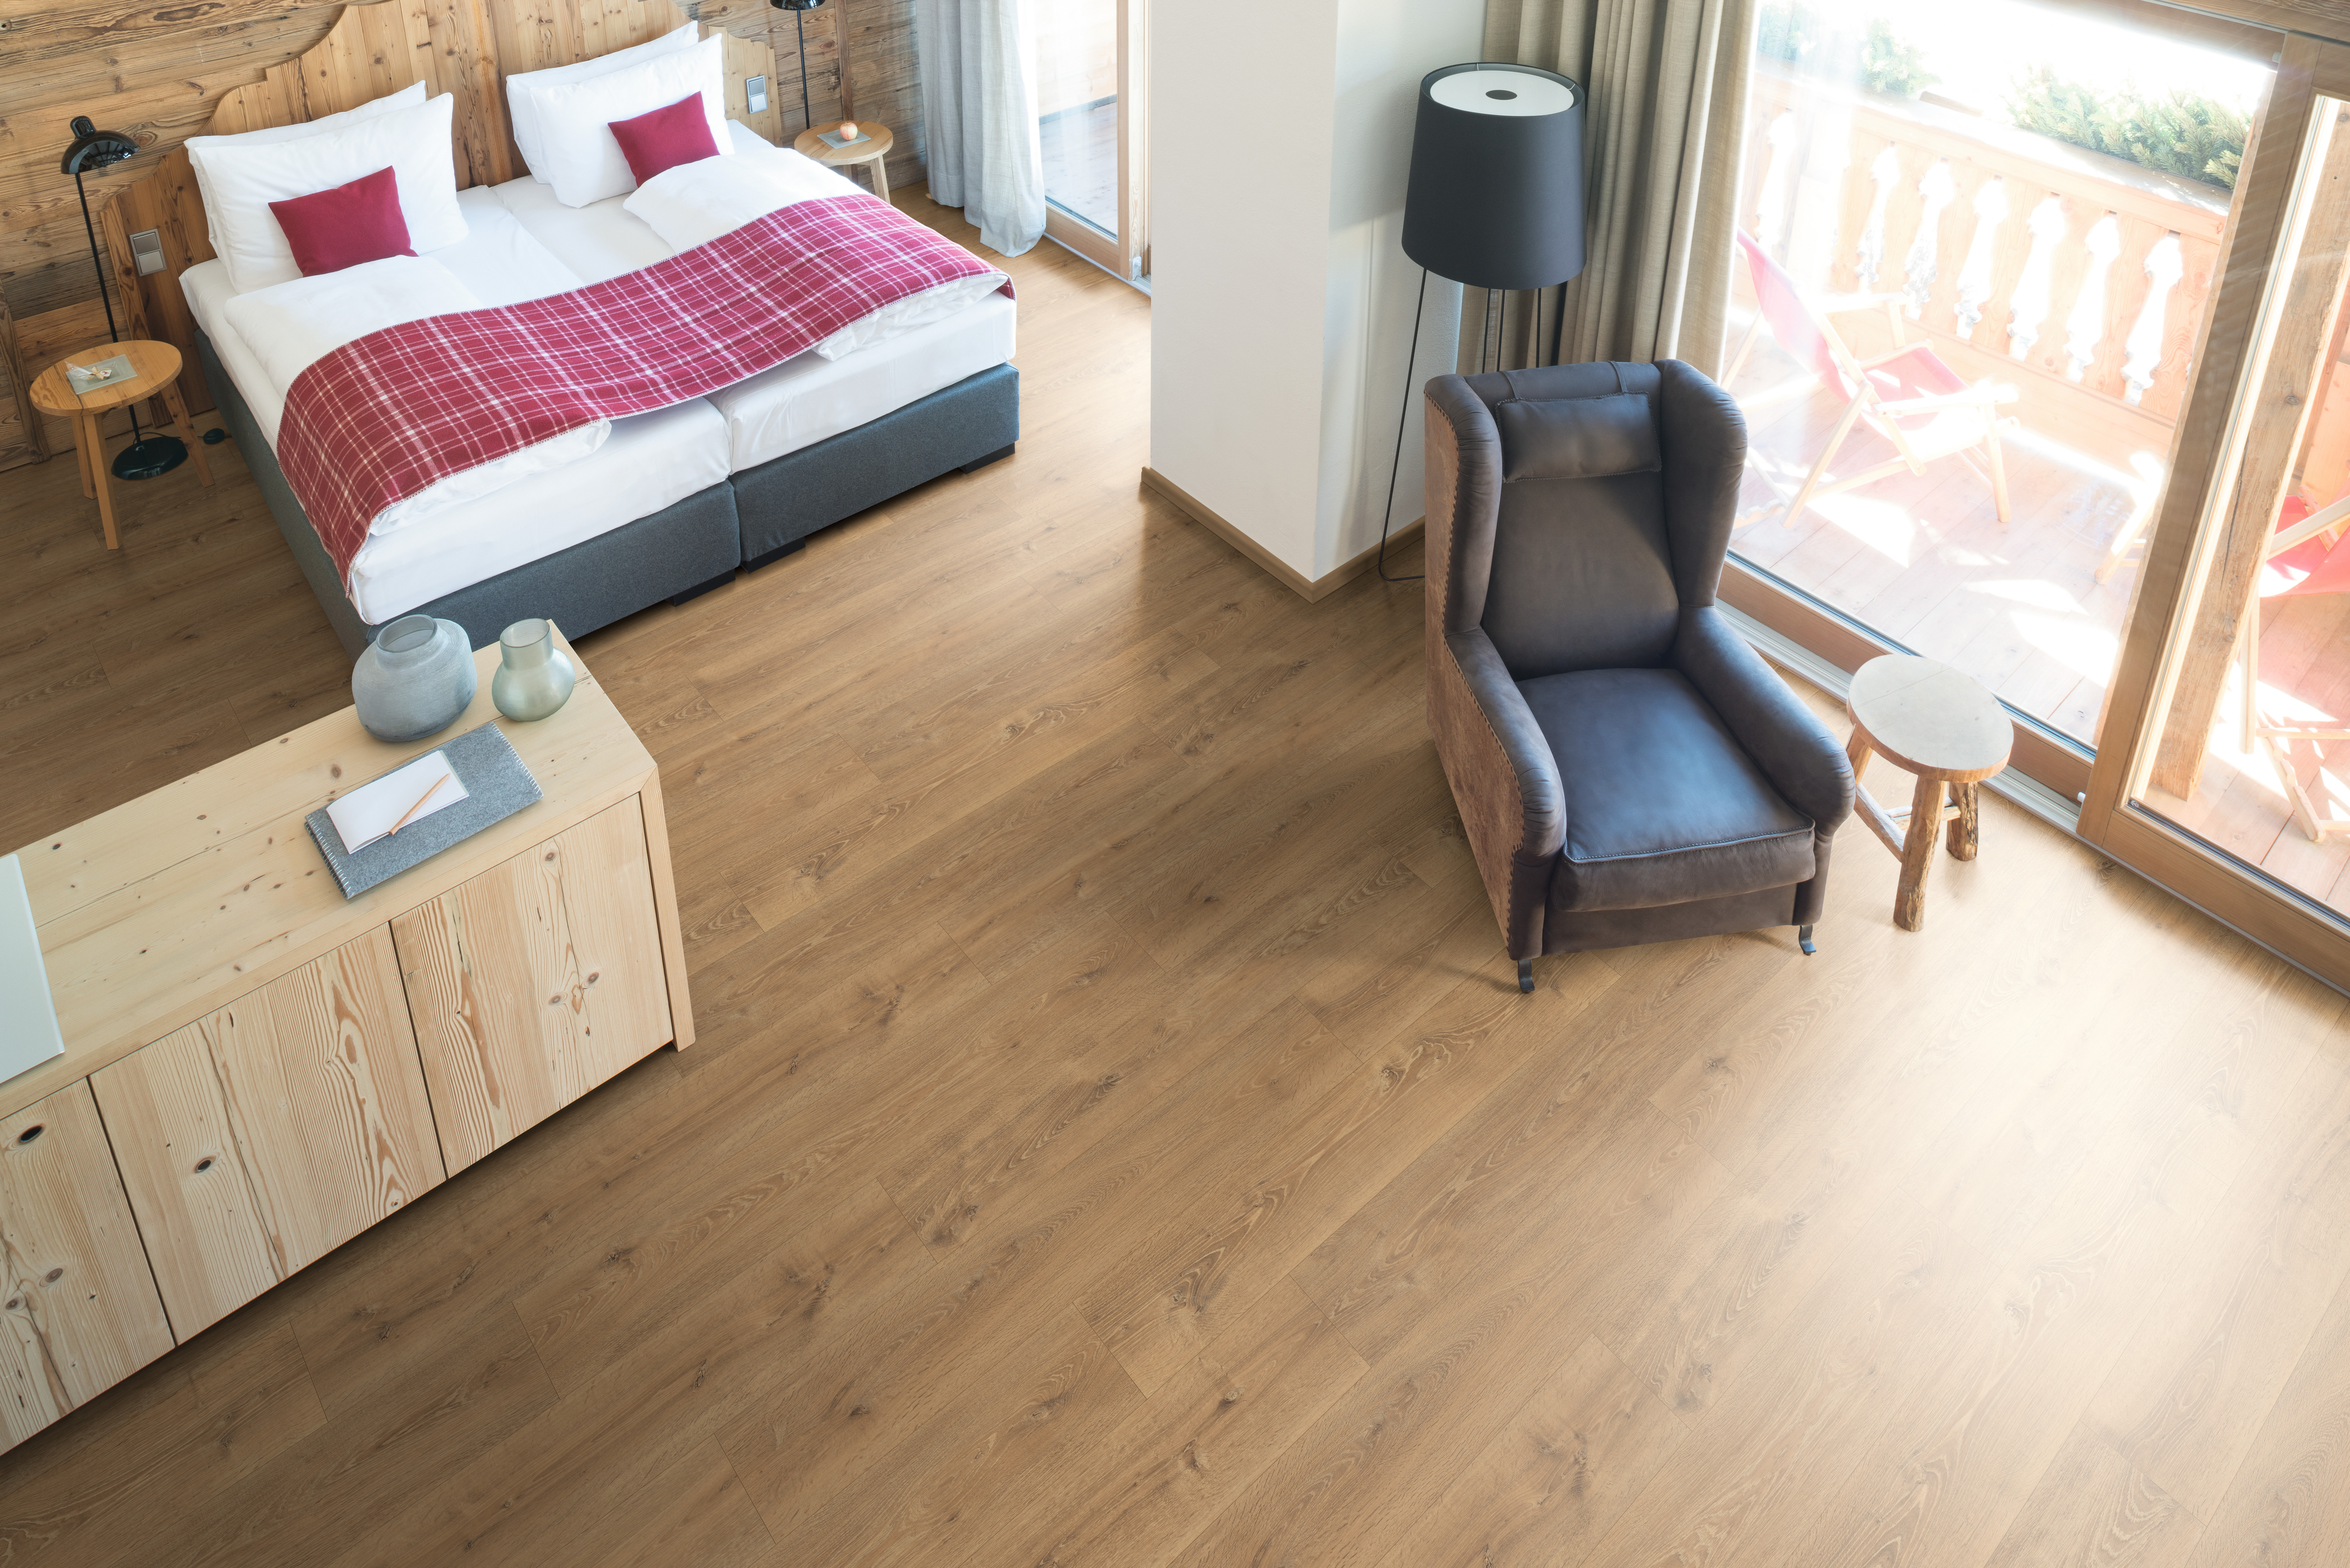 Wide floorboards emphasise the size of the space